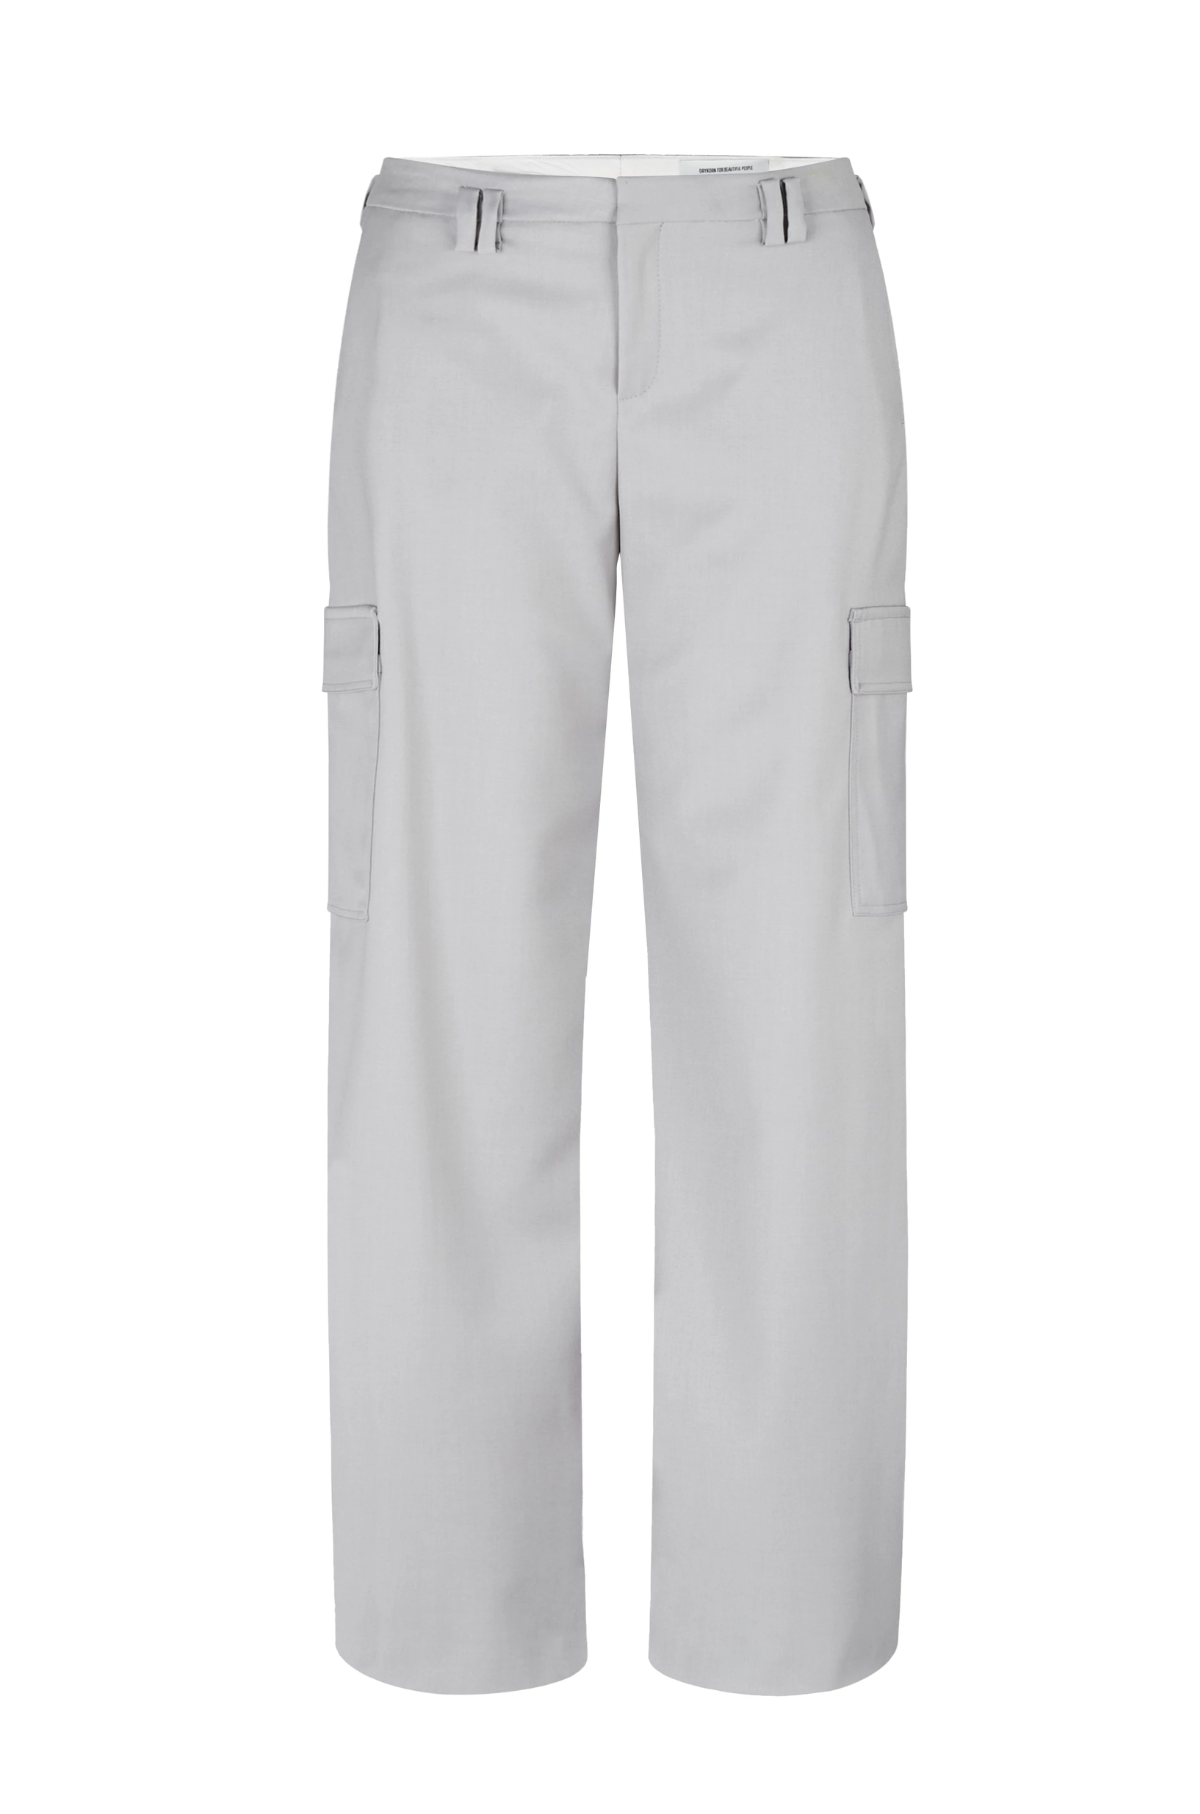 Drykorn - Ductile Cargo Pant